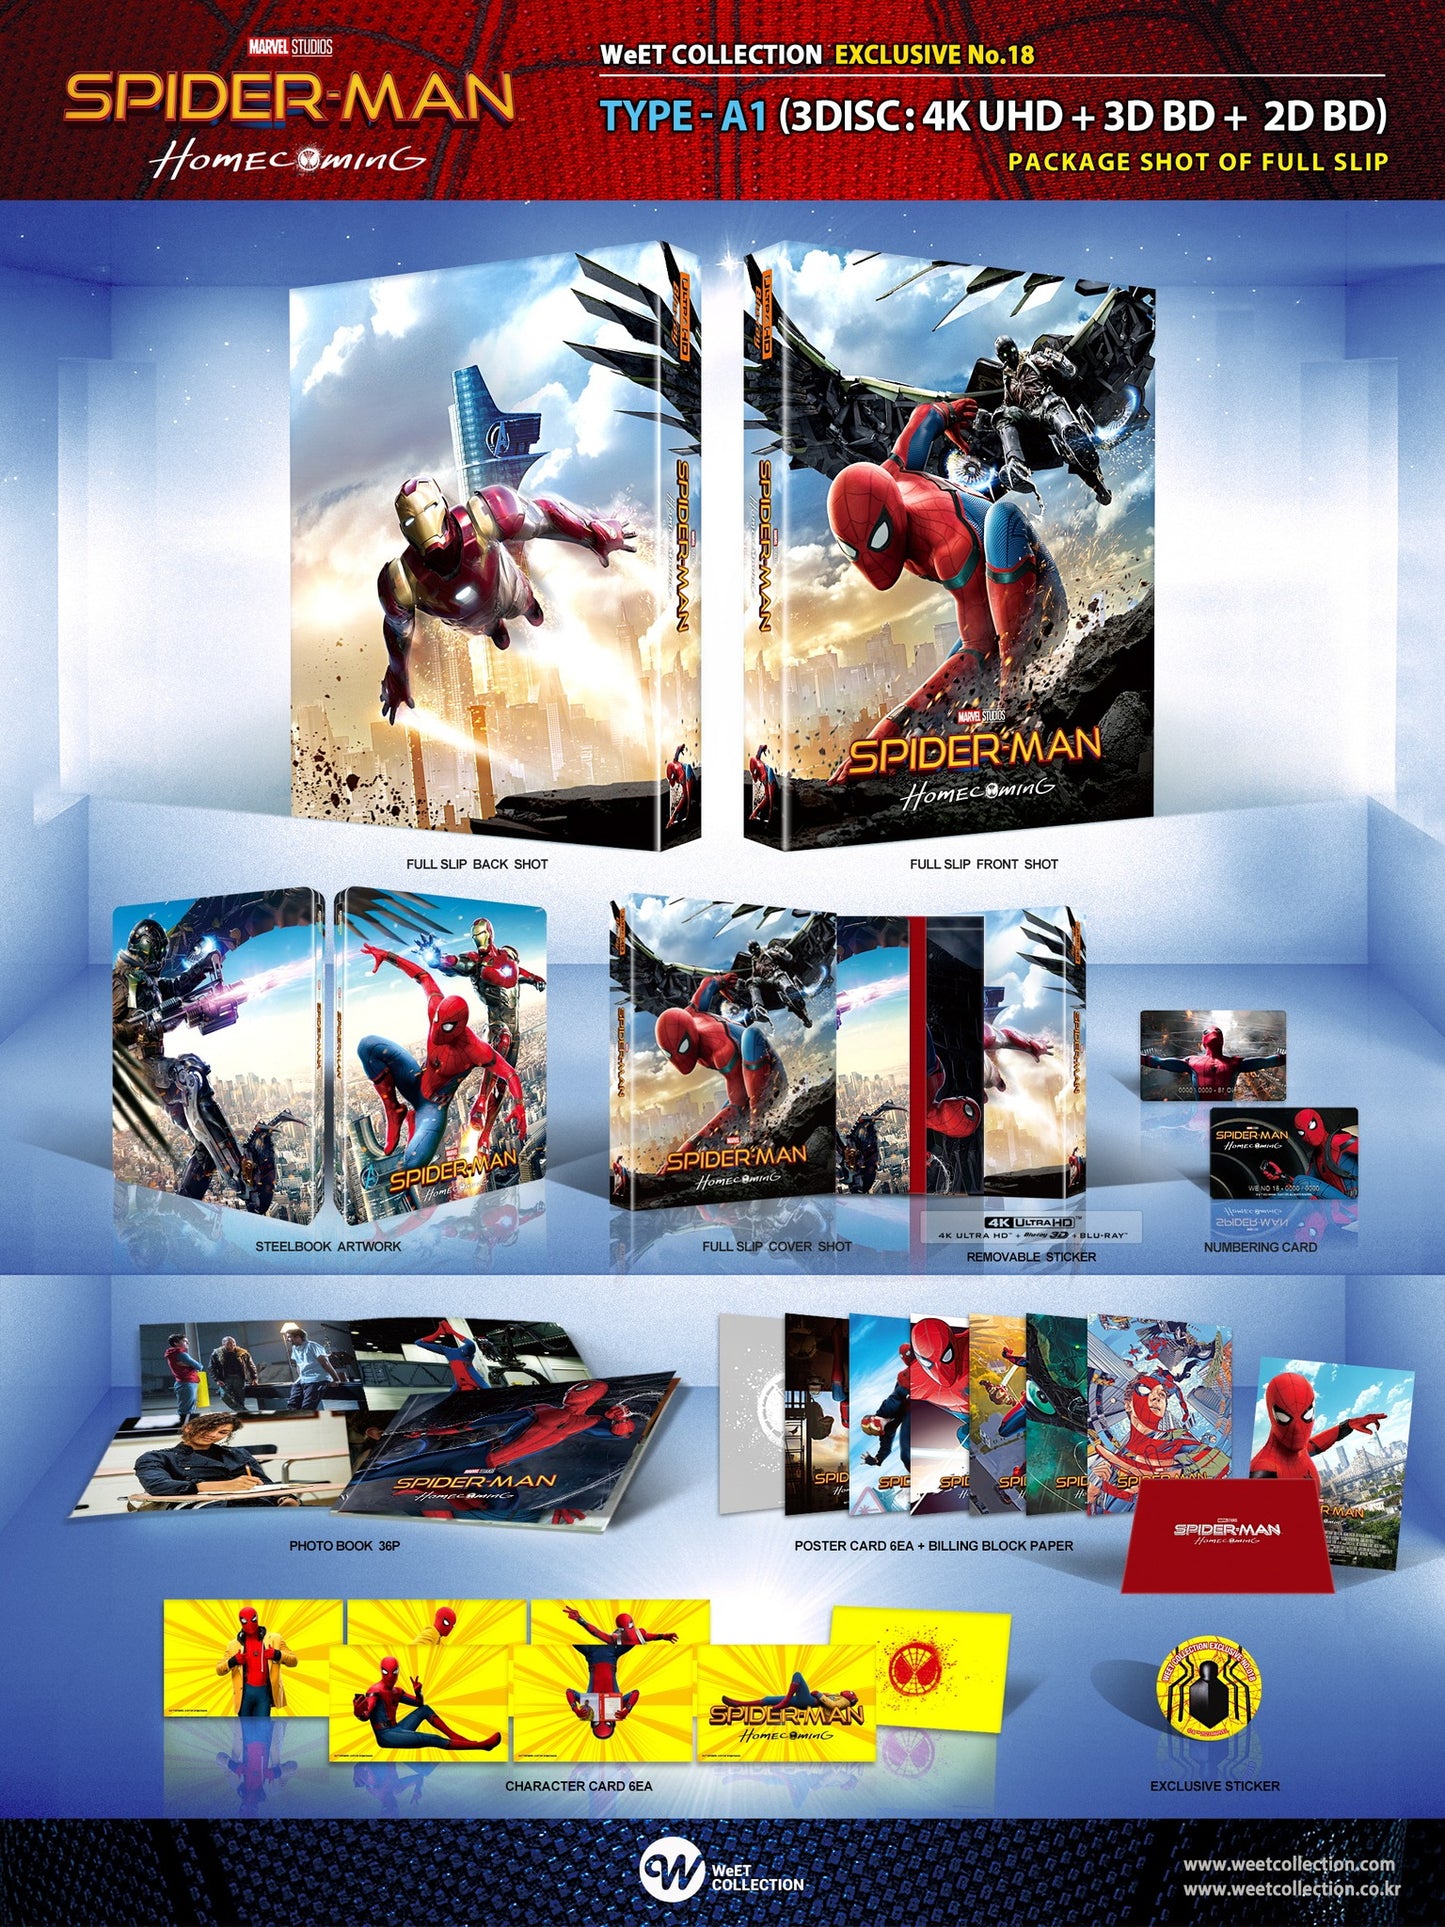 Spider-Man Homecoming 4K 3D Blu-ray Steelbook WeET Collection Exclusive #18 HDN GB Pre-Order One Click Box Set